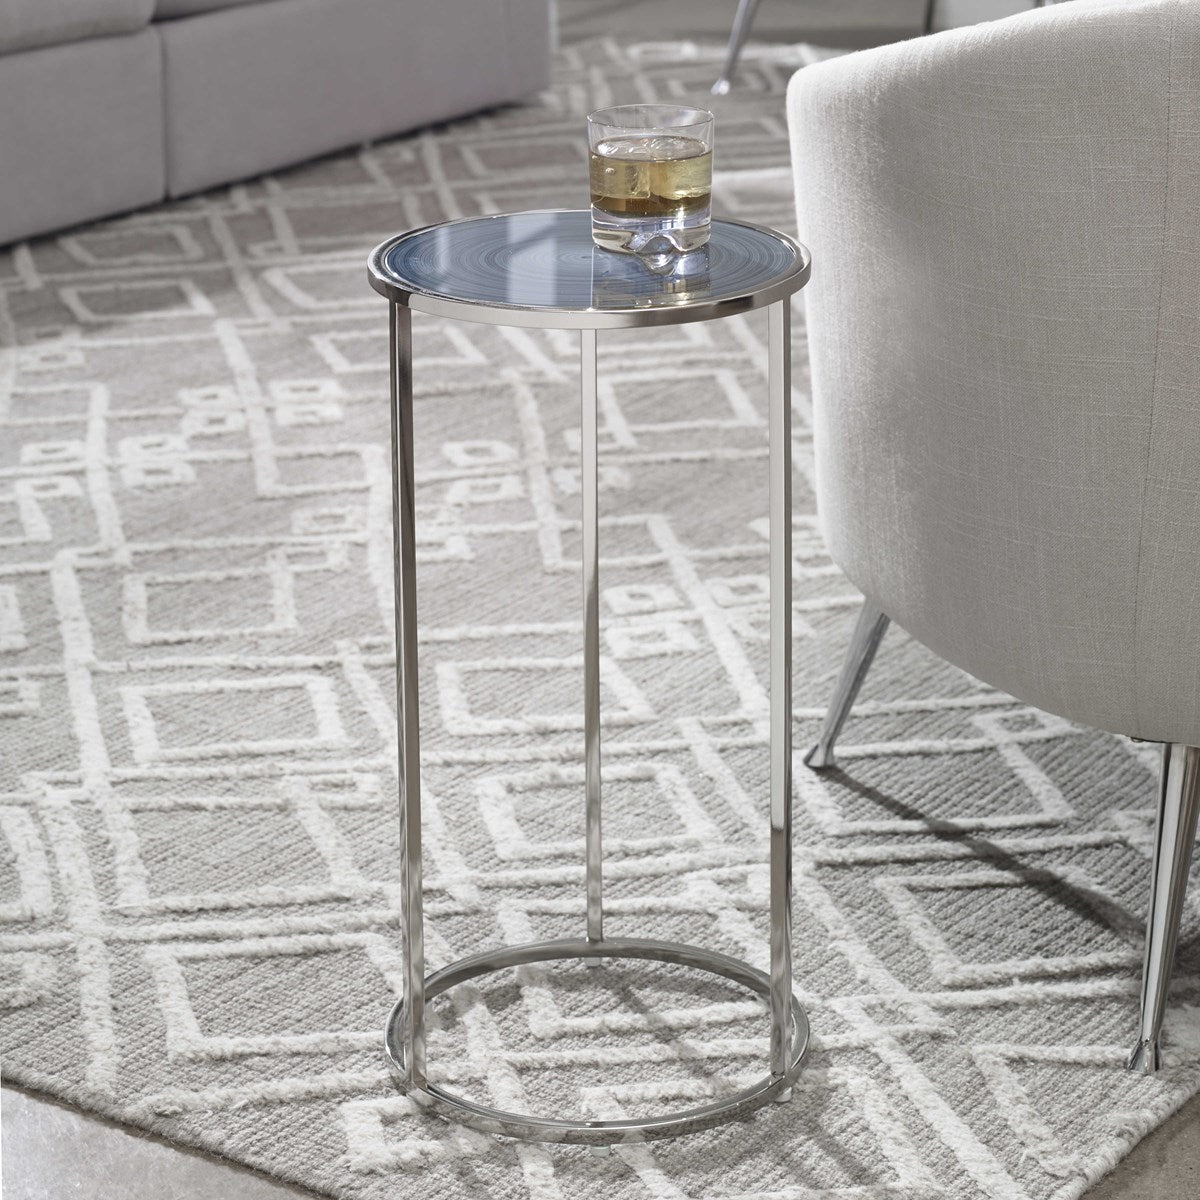 Uttermost, Whirl Drink Table